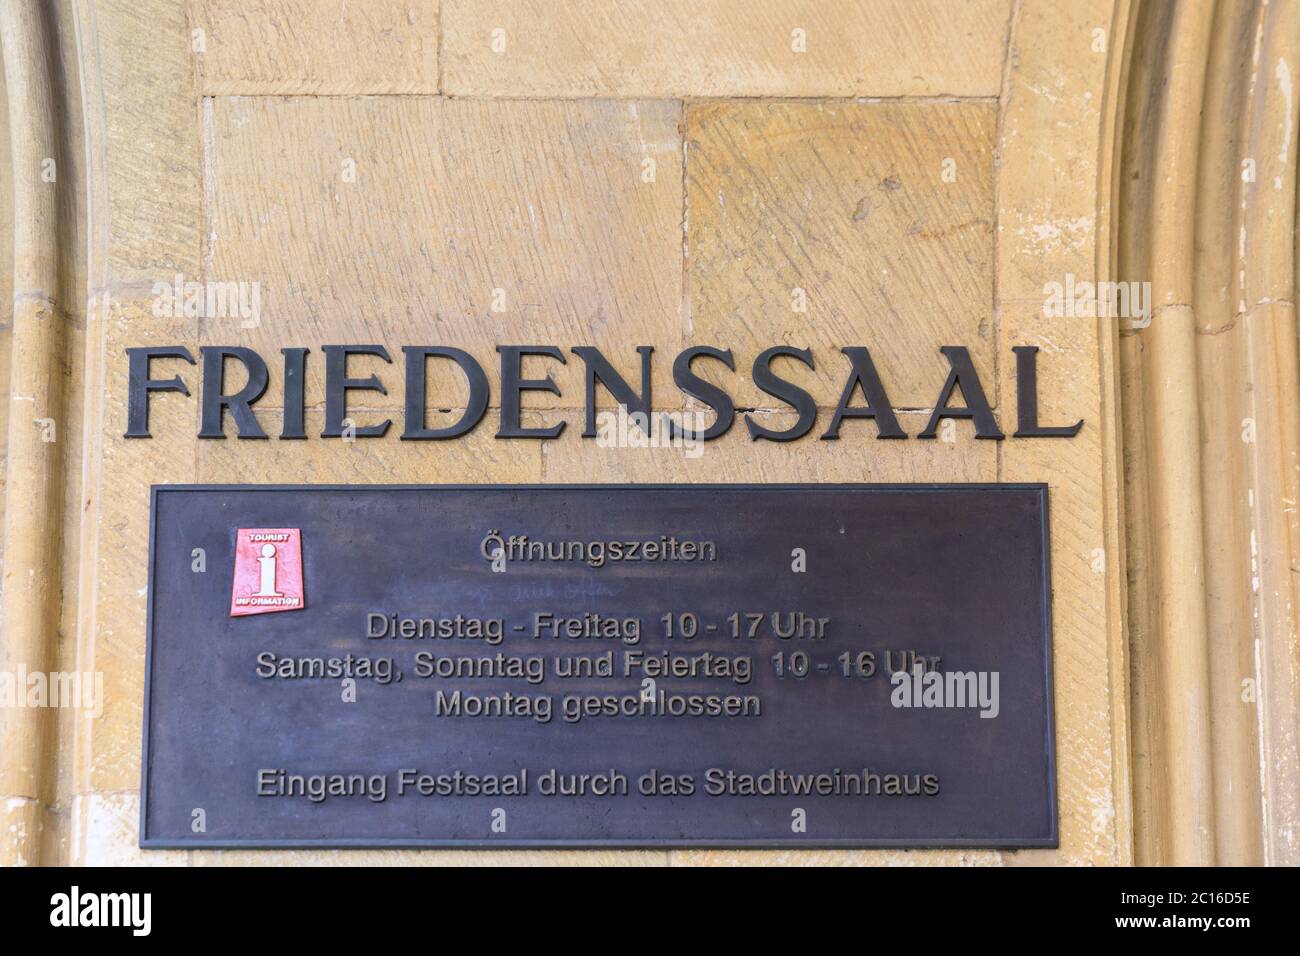 Friedenssaal sign at the entrance to the celebratory hall of the Peace of Westphalia at the historic City Hall, Münster, Germany Stock Photo